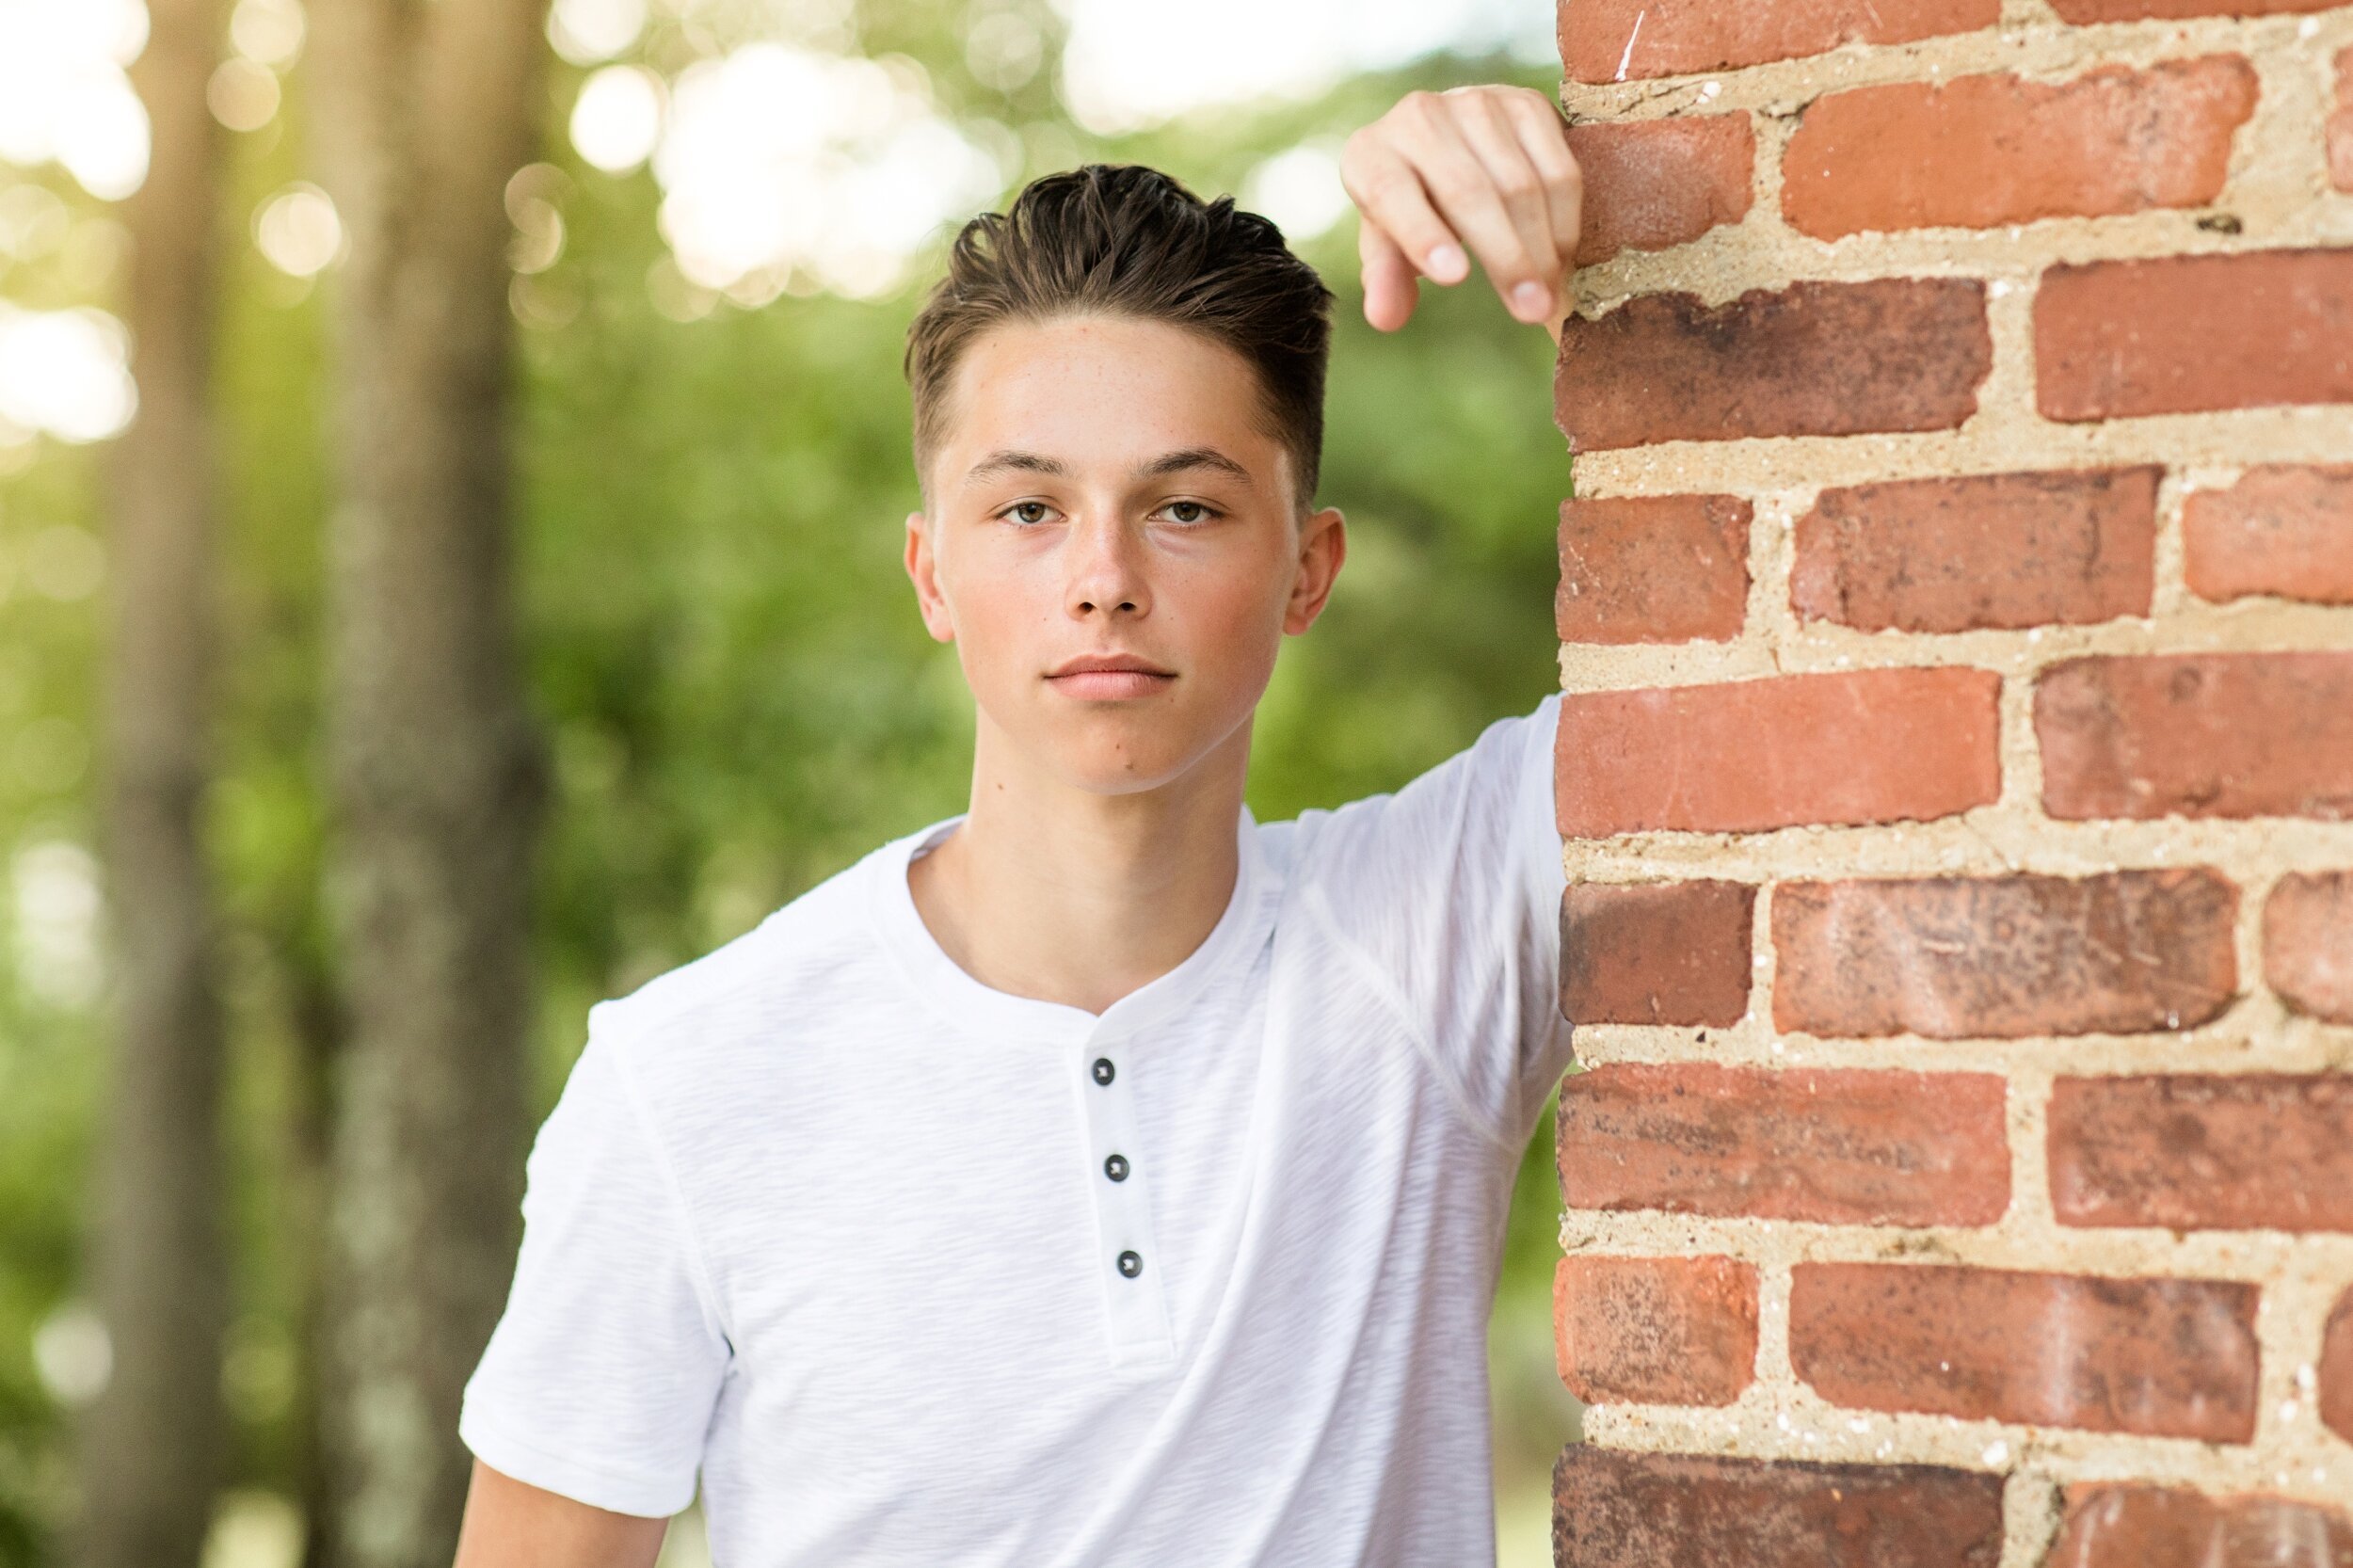 butler county senior photo locations, senior picture location ideas butler county, cranberry township senior photos, zelienople senior photos, mars senior photos, adams township park senior photos